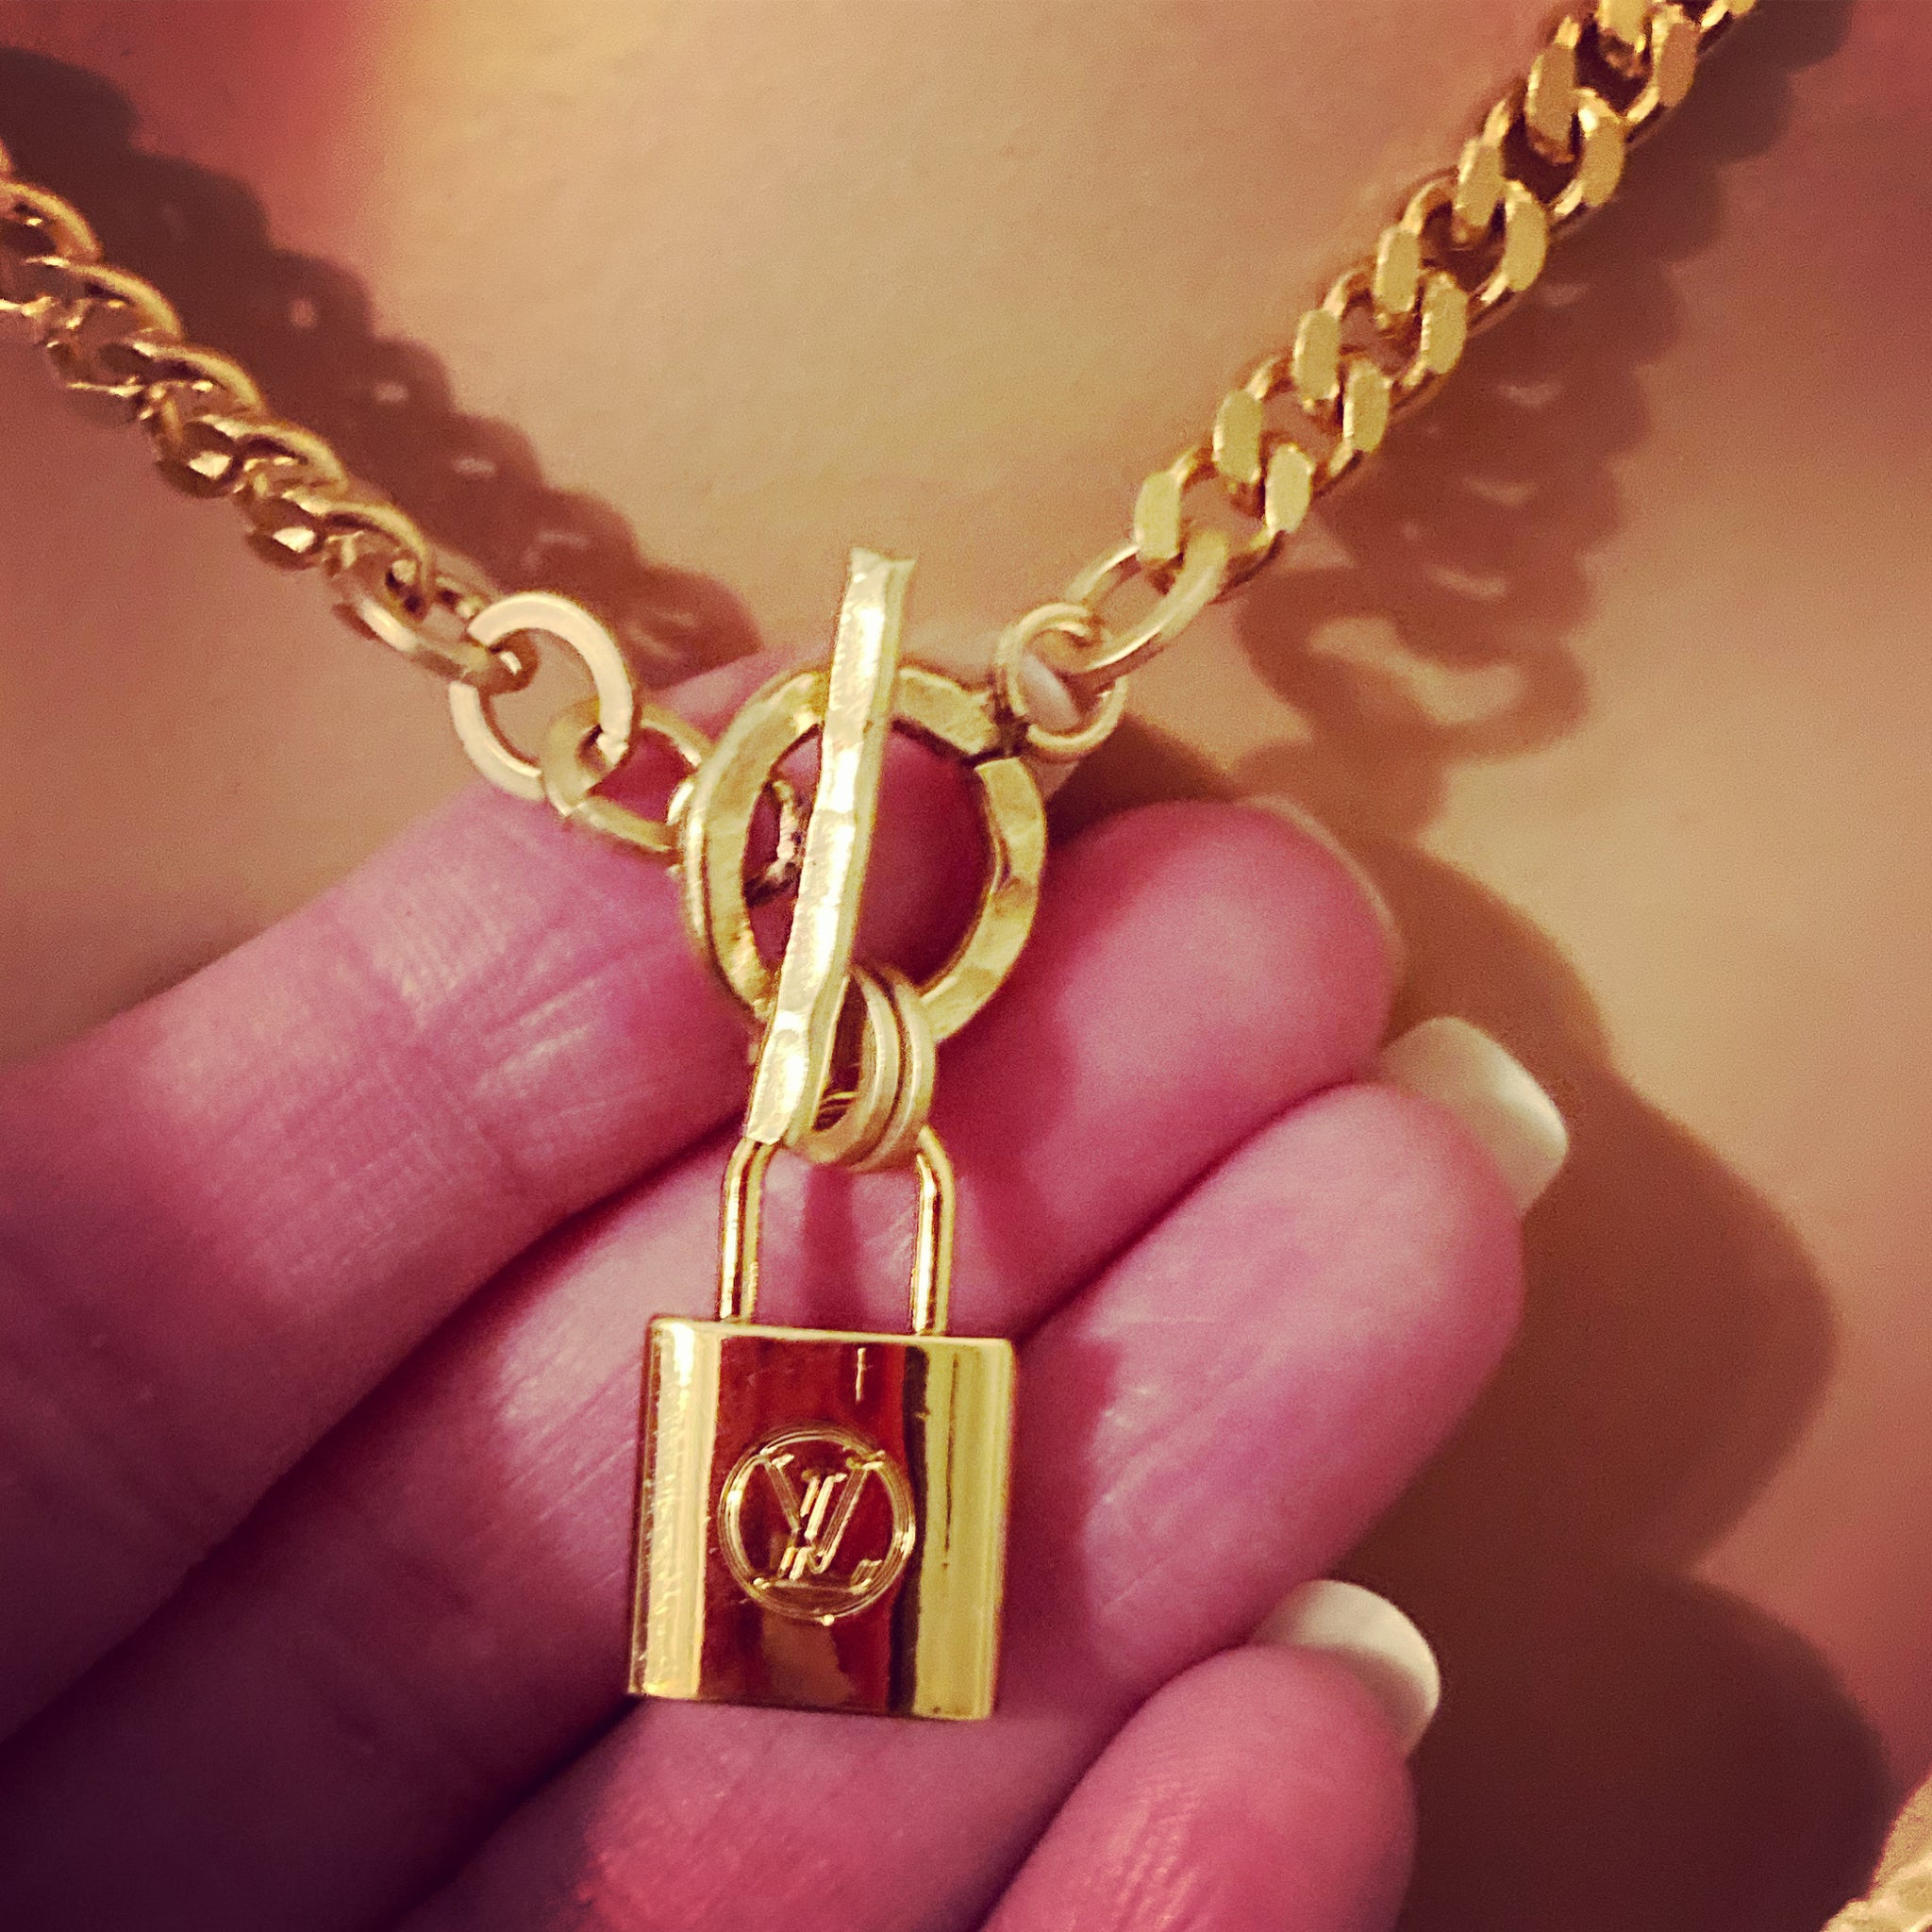 chain necklace for lv lock